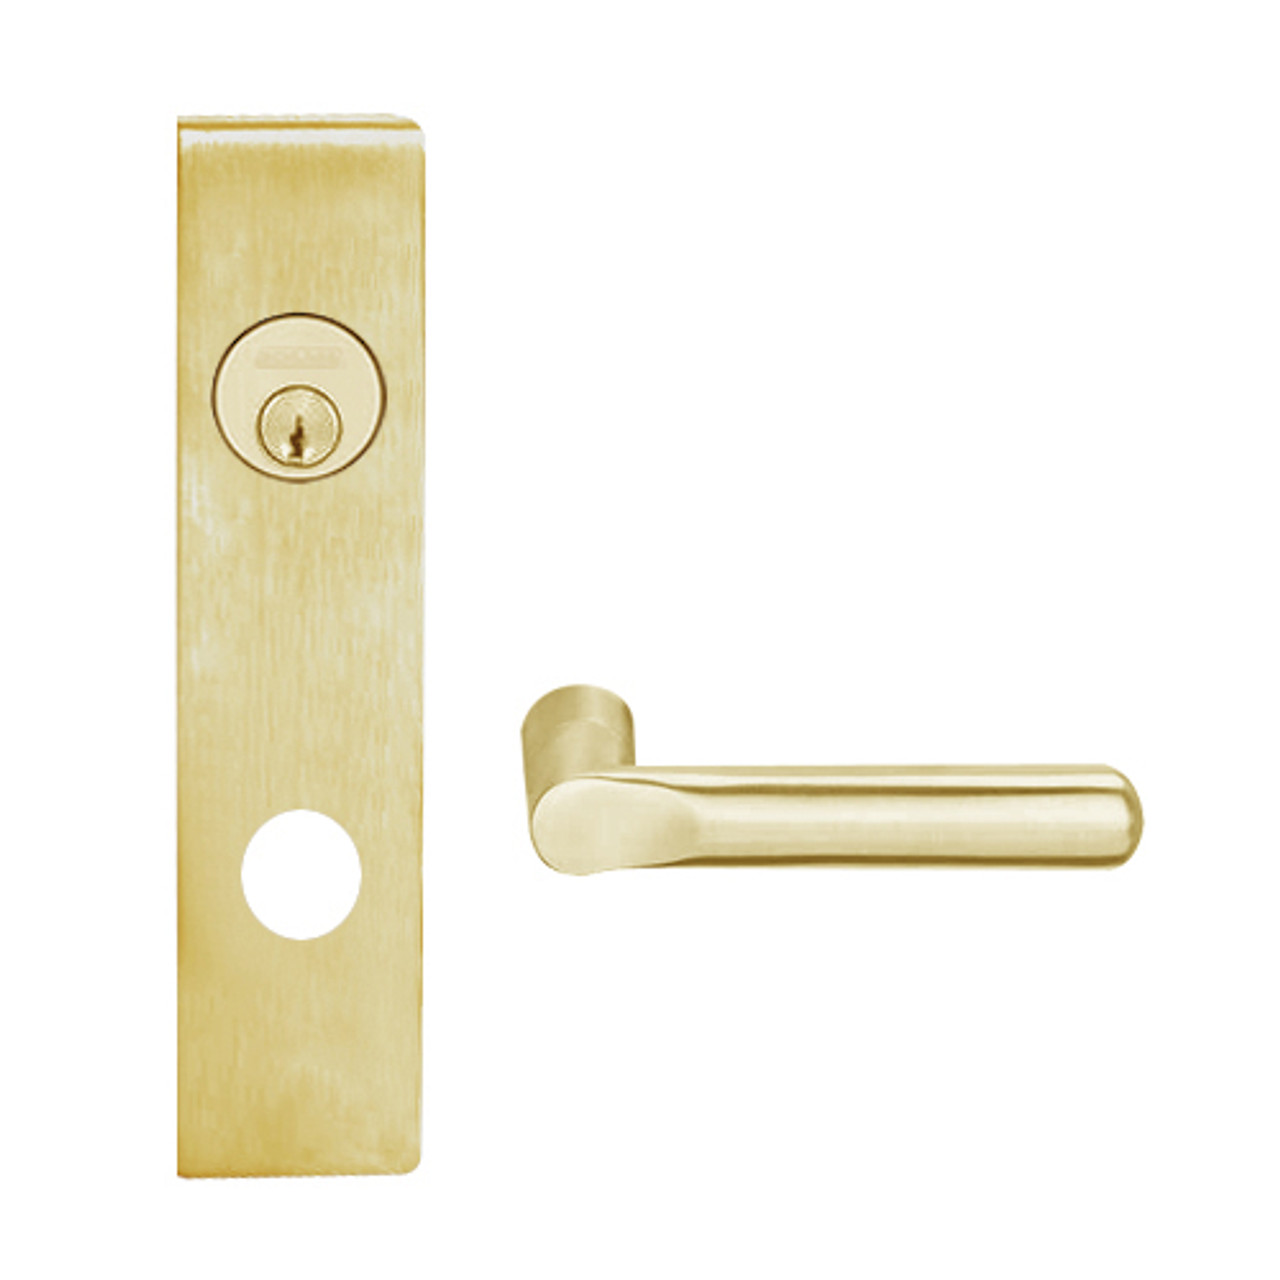 L9070L-18L-606 Schlage L Series Less Cylinder Classroom Commercial Mortise Lock with 18 Cast Lever Design in Satin Brass